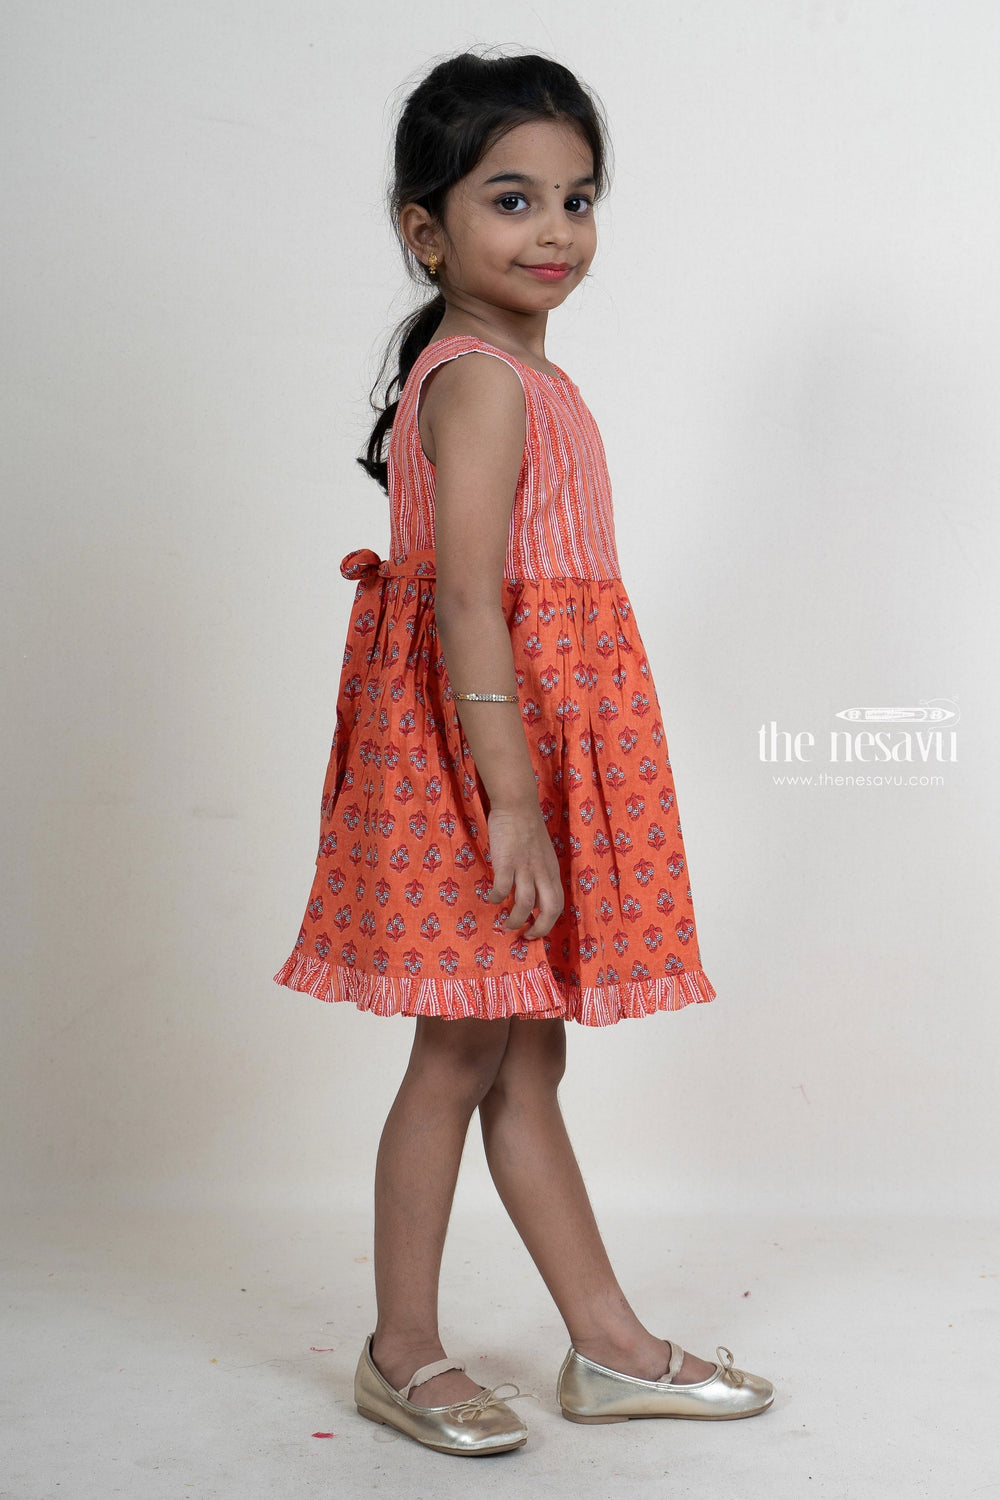 The Nesavu Frocks & Dresses Brown Soft Cotton Printed Gown For Girls With Embroidery Motif psr silks Nesavu